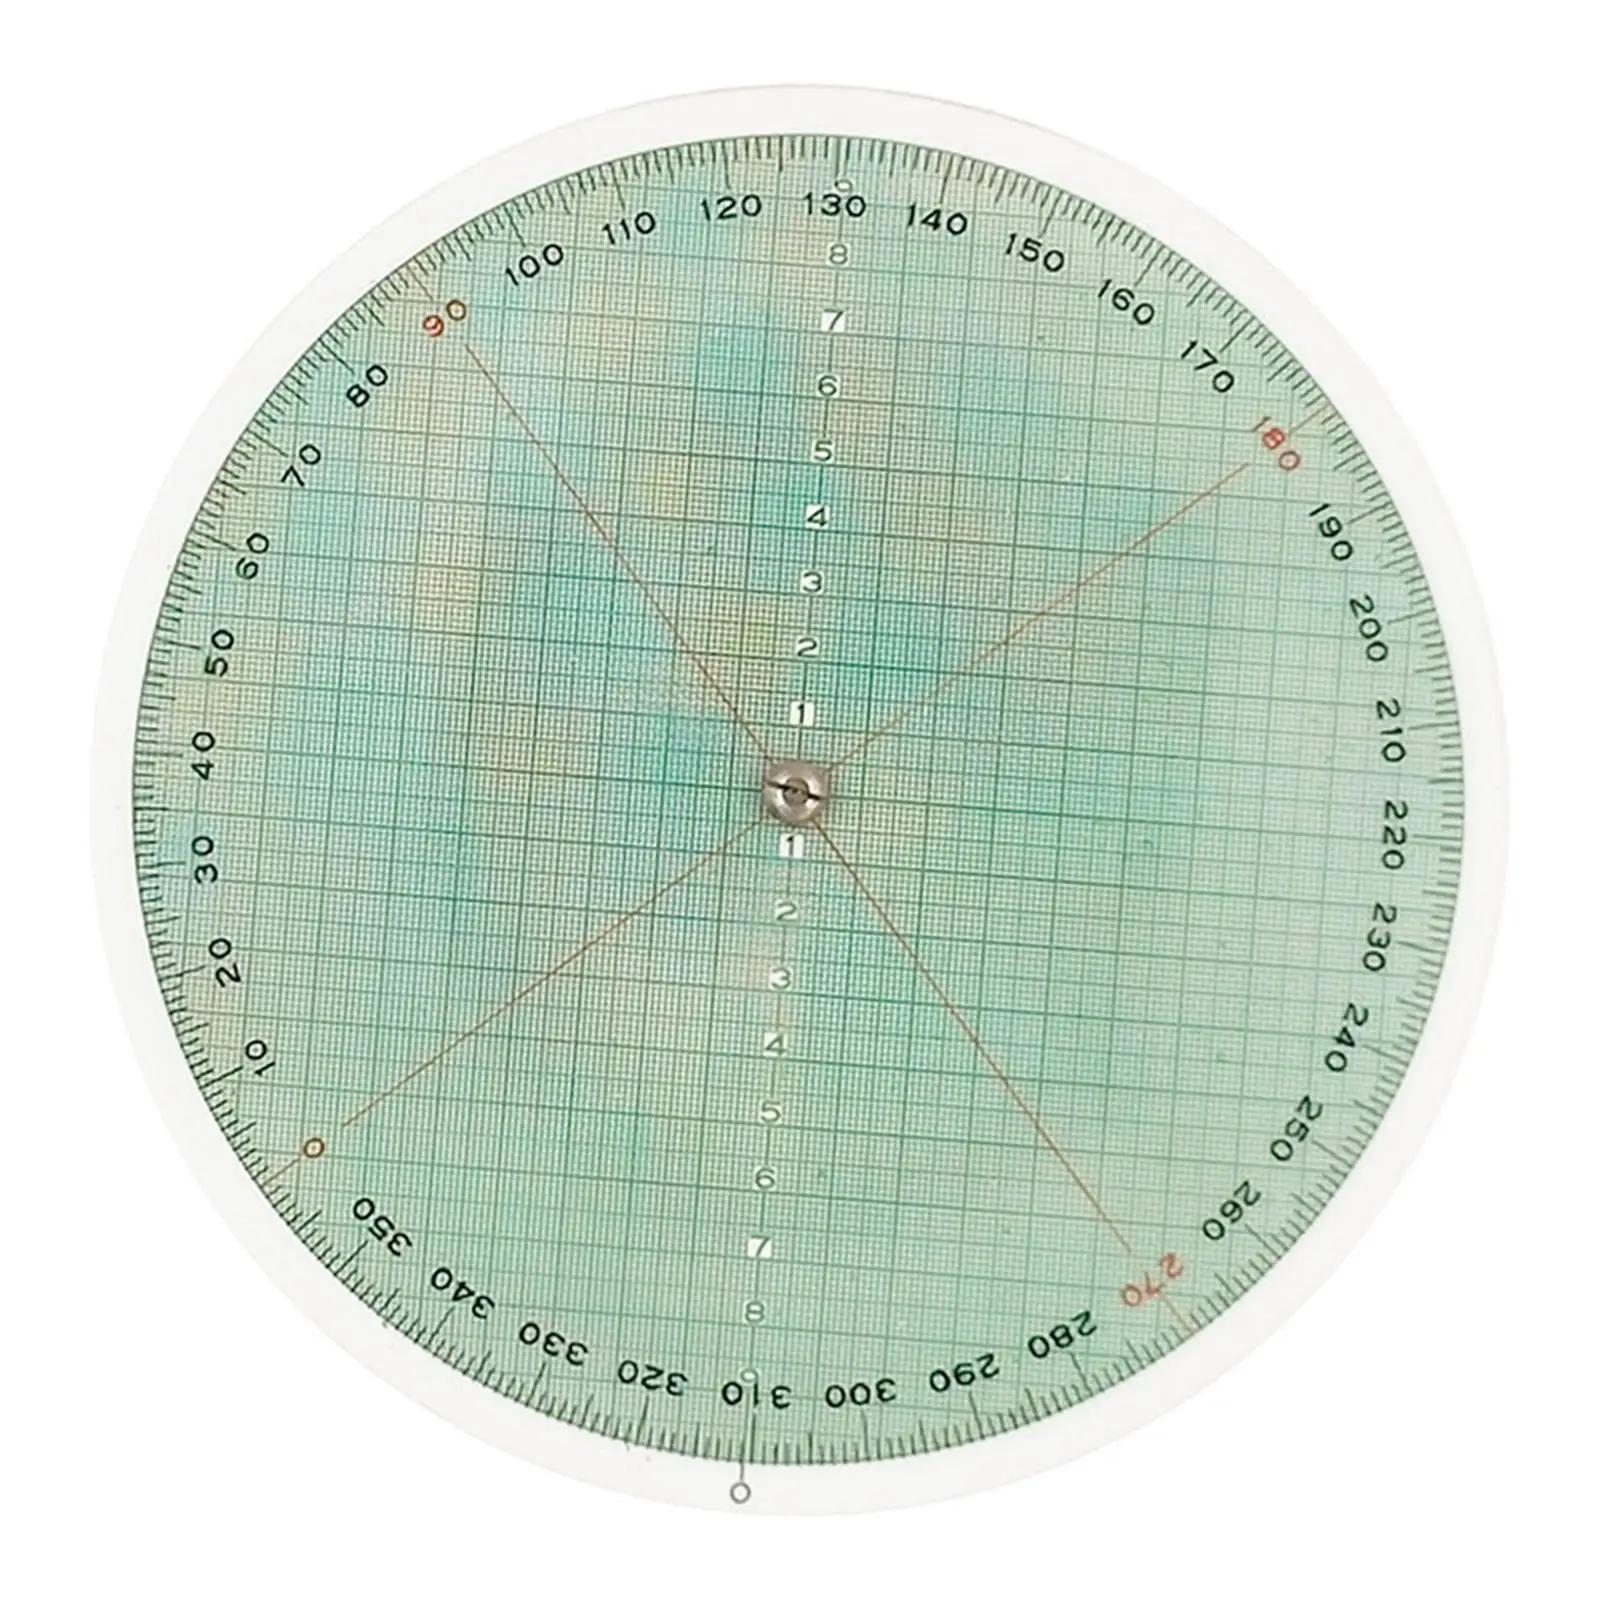 Nautical Slide Rule Supplies Portable Stable Simple to Use Durable Lightweight Slide Rule Calculator Sailing Circular Ruler